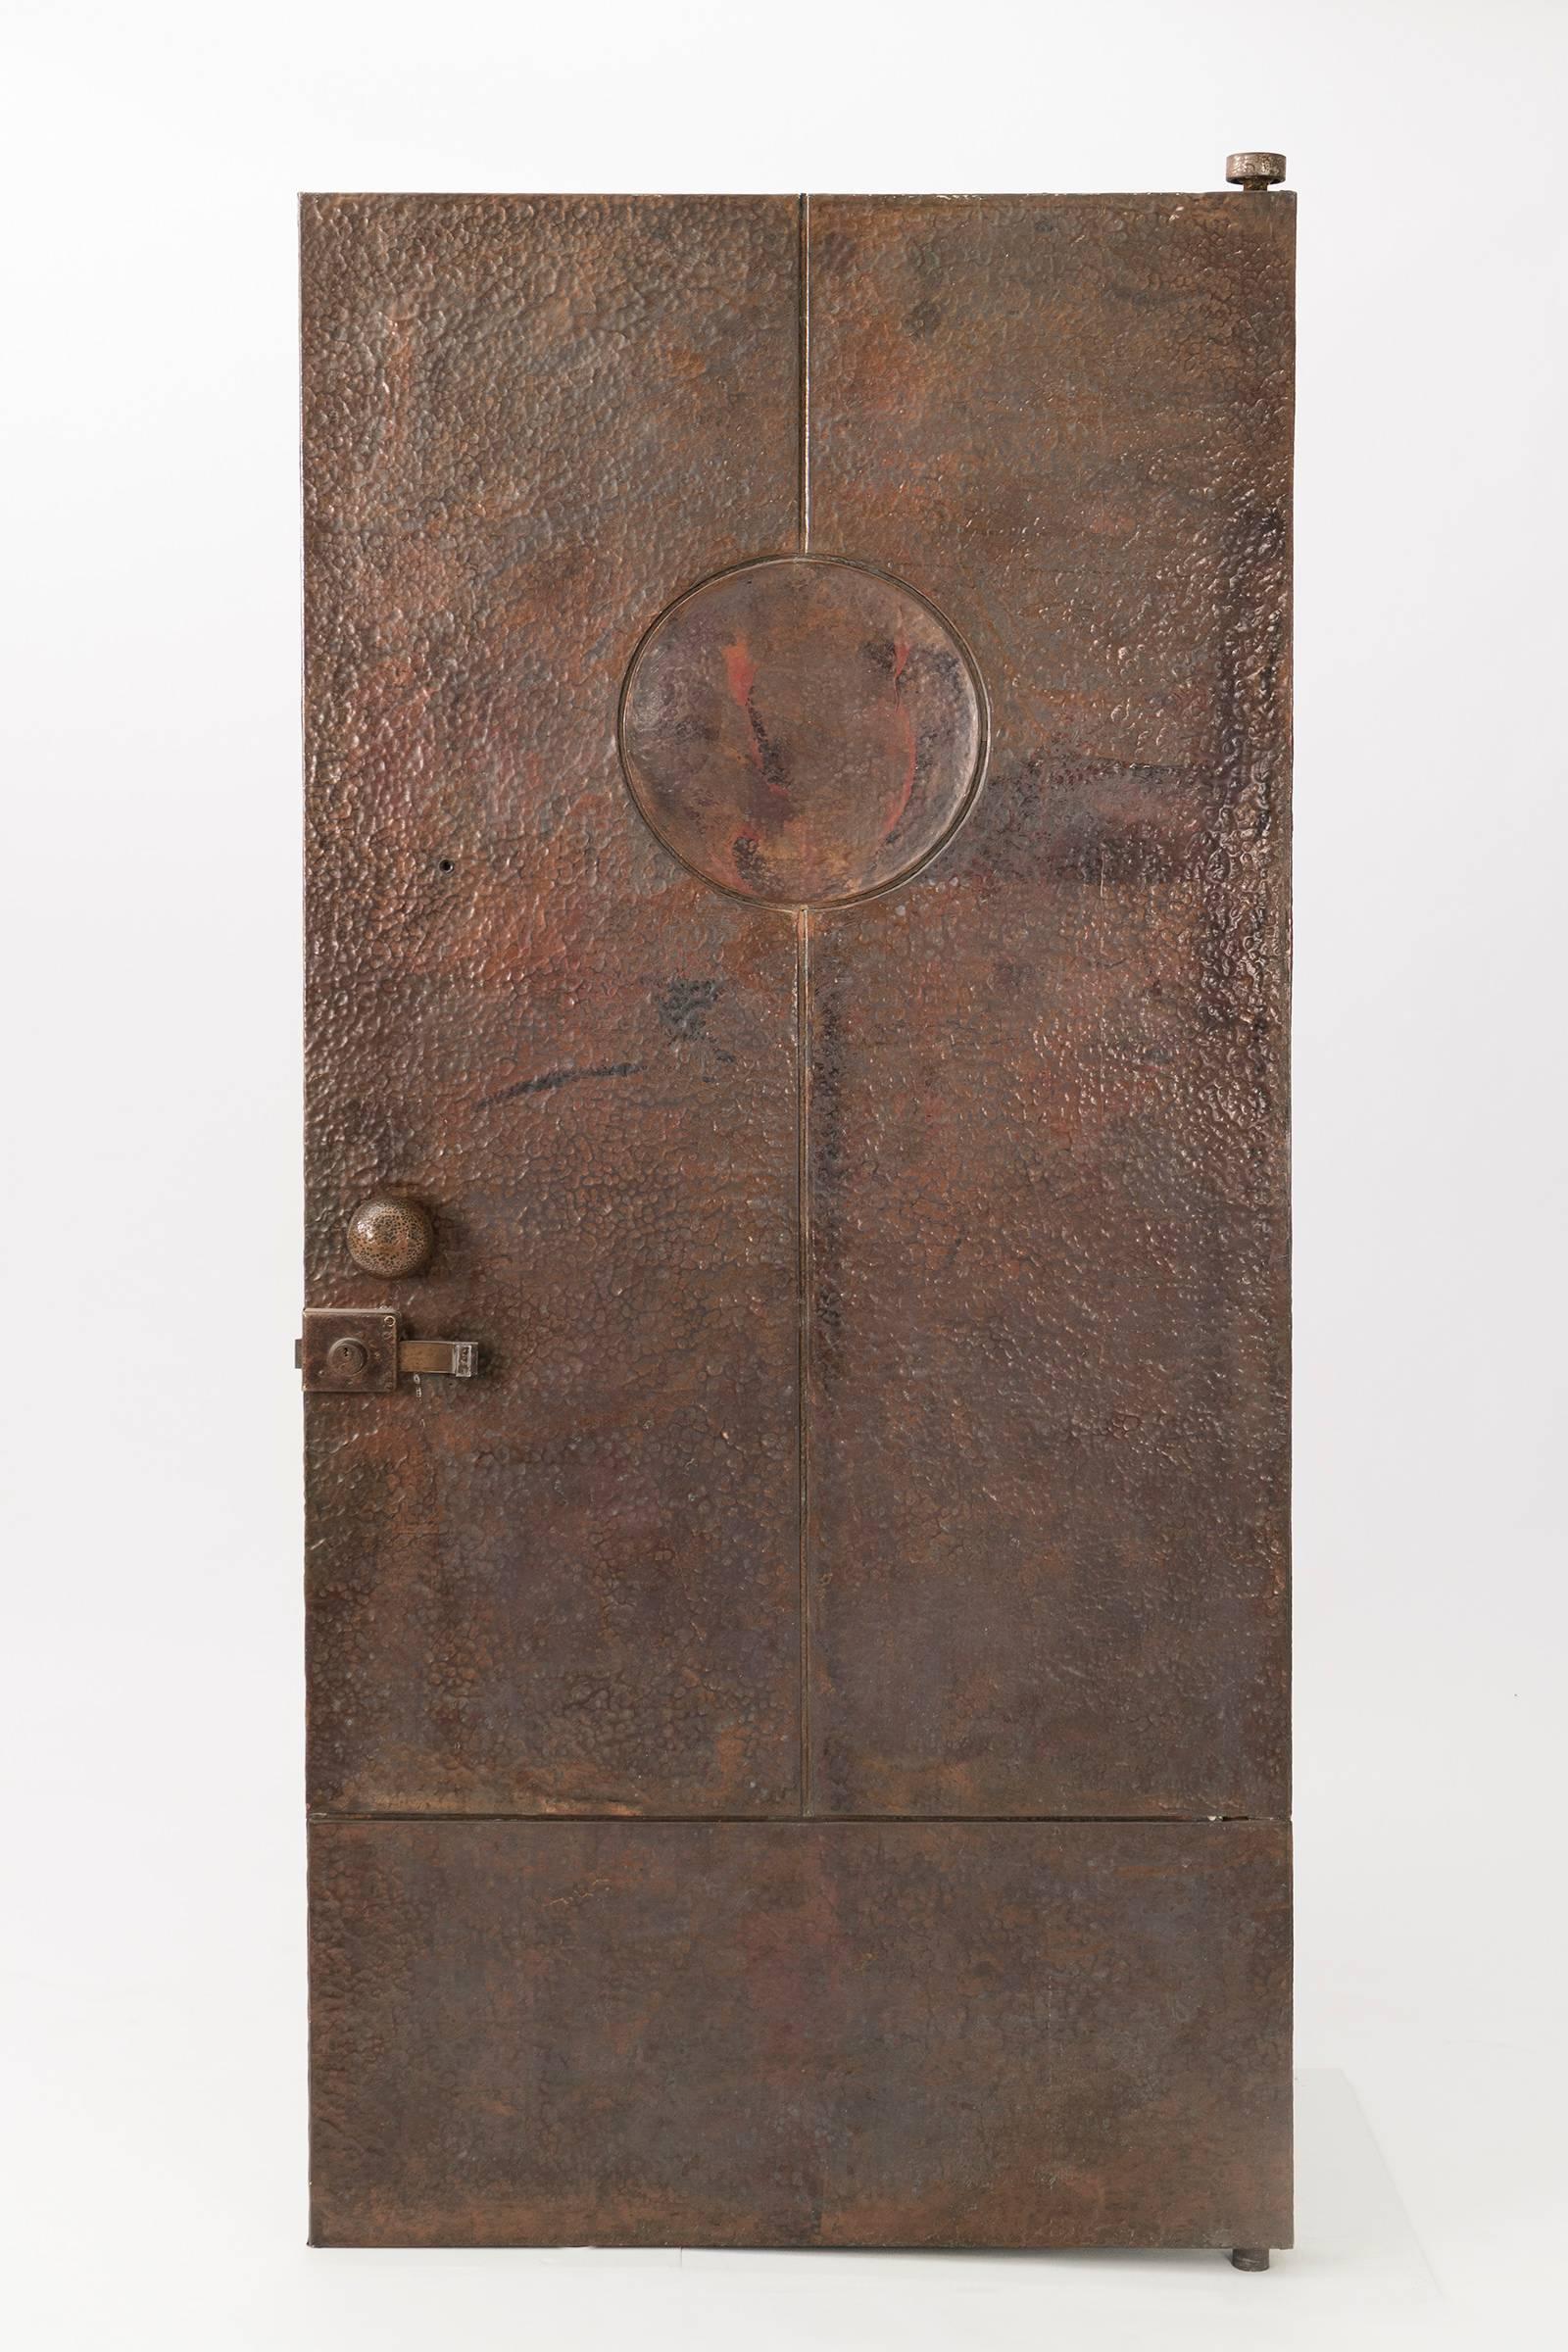 Important custom door designed by Ricardo Legorreta for the residence of Ricardo Montalbon's residence in the Hollywood Hills. This monumental door is made from hand-hammered copper over wood with solid copper door knobs and slider latch with lock